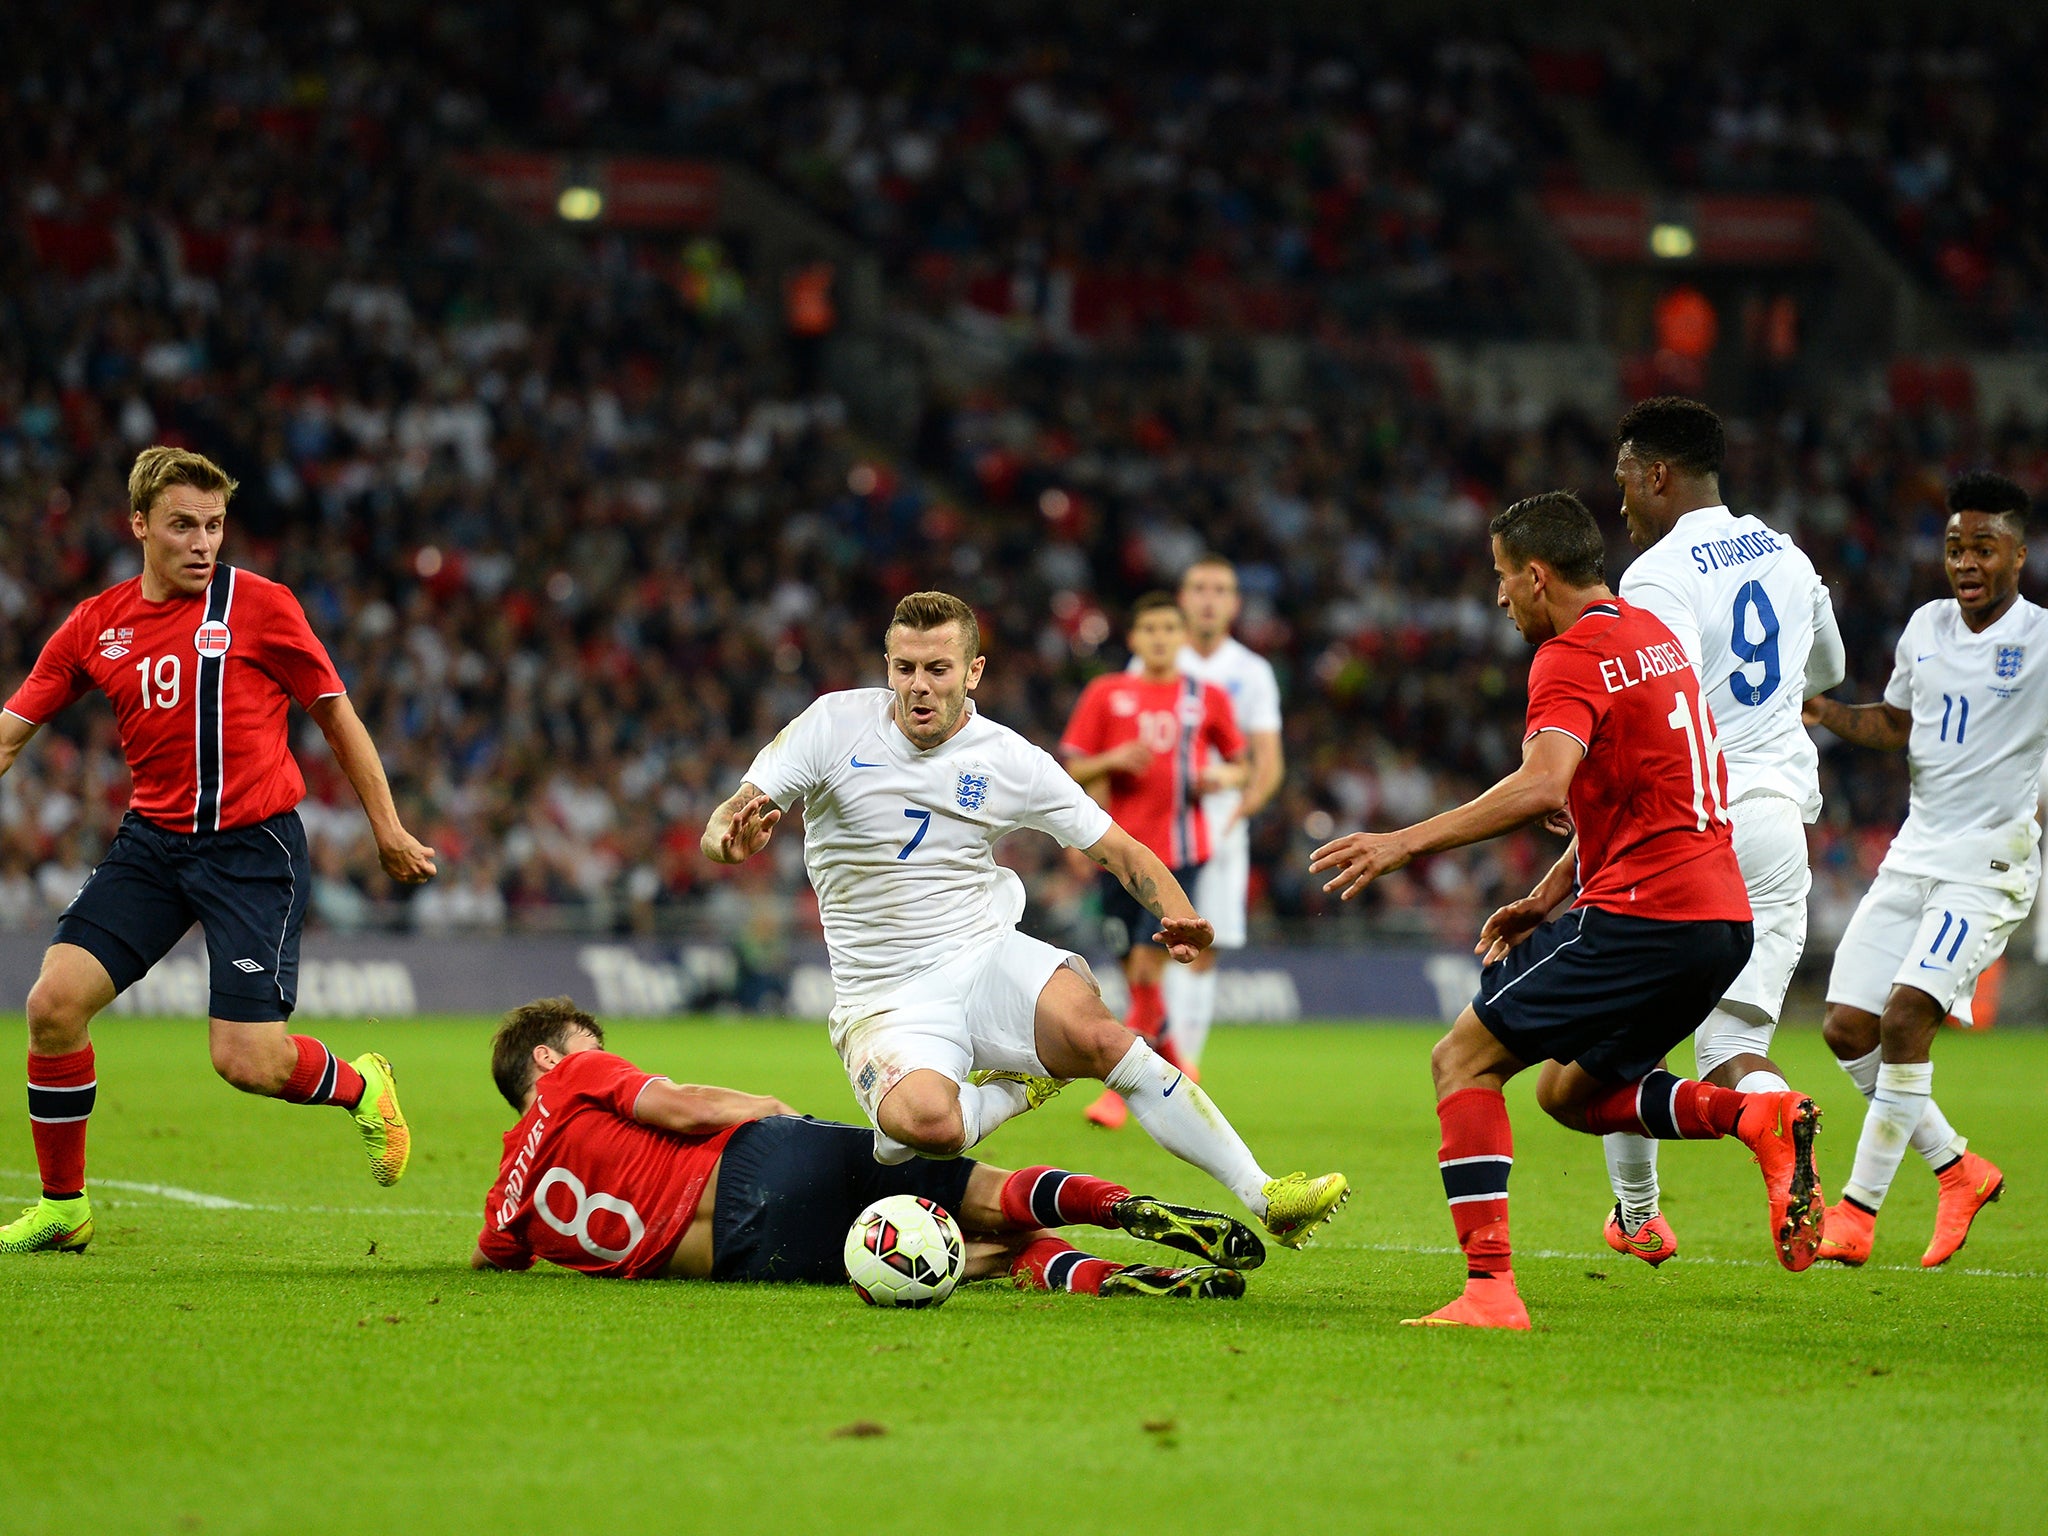 Jack Wilshere tumbles in the box during England's 1-0 win over Norway